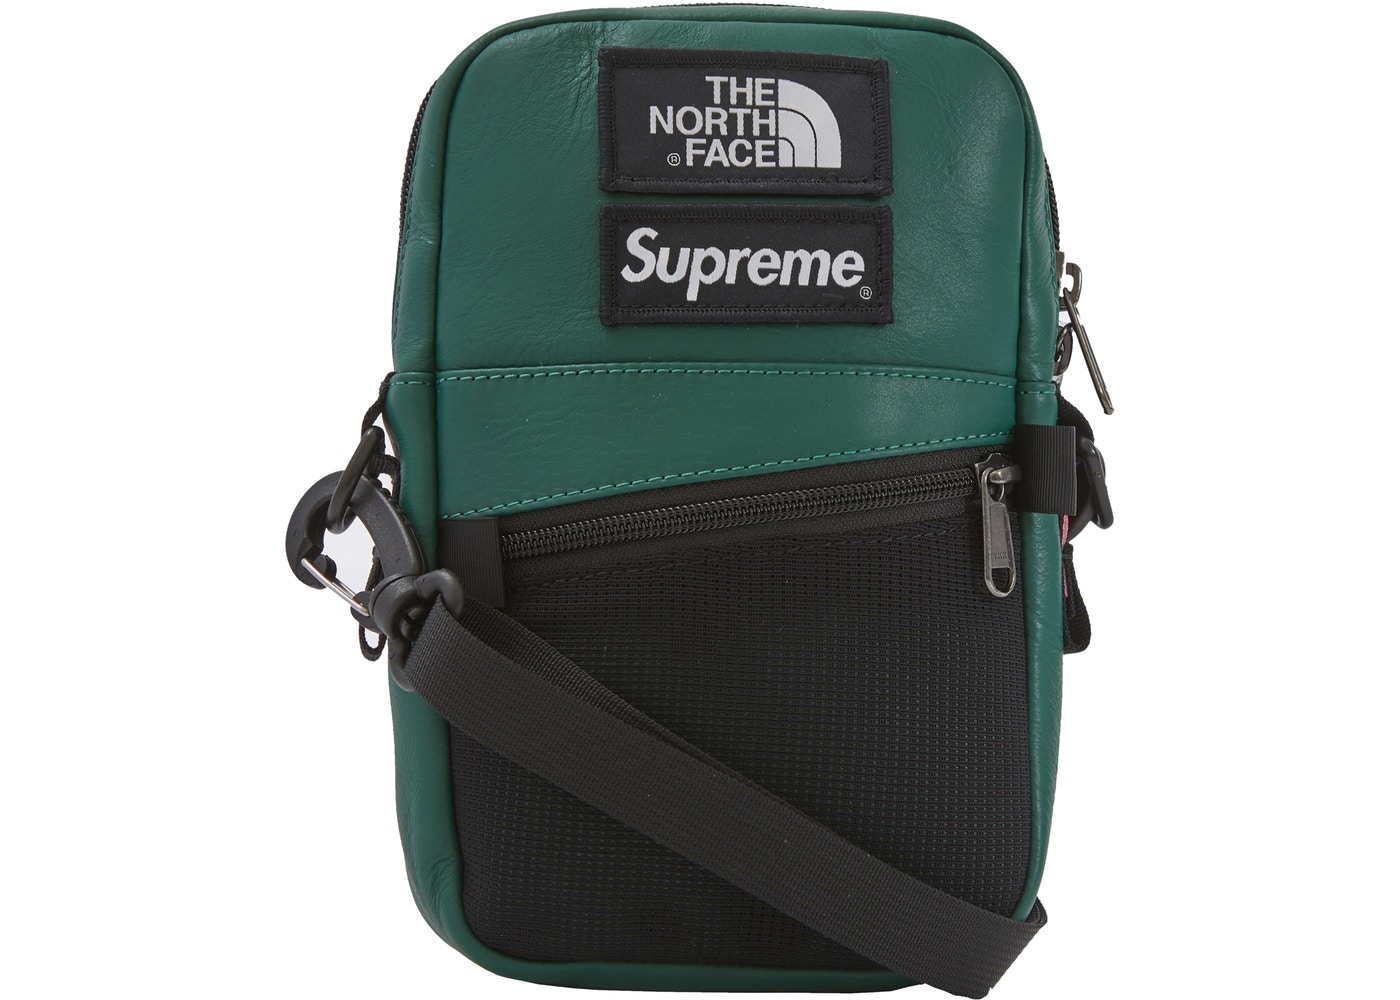 Supreme The North Face Leather Shoulder Bag Green - StockX News